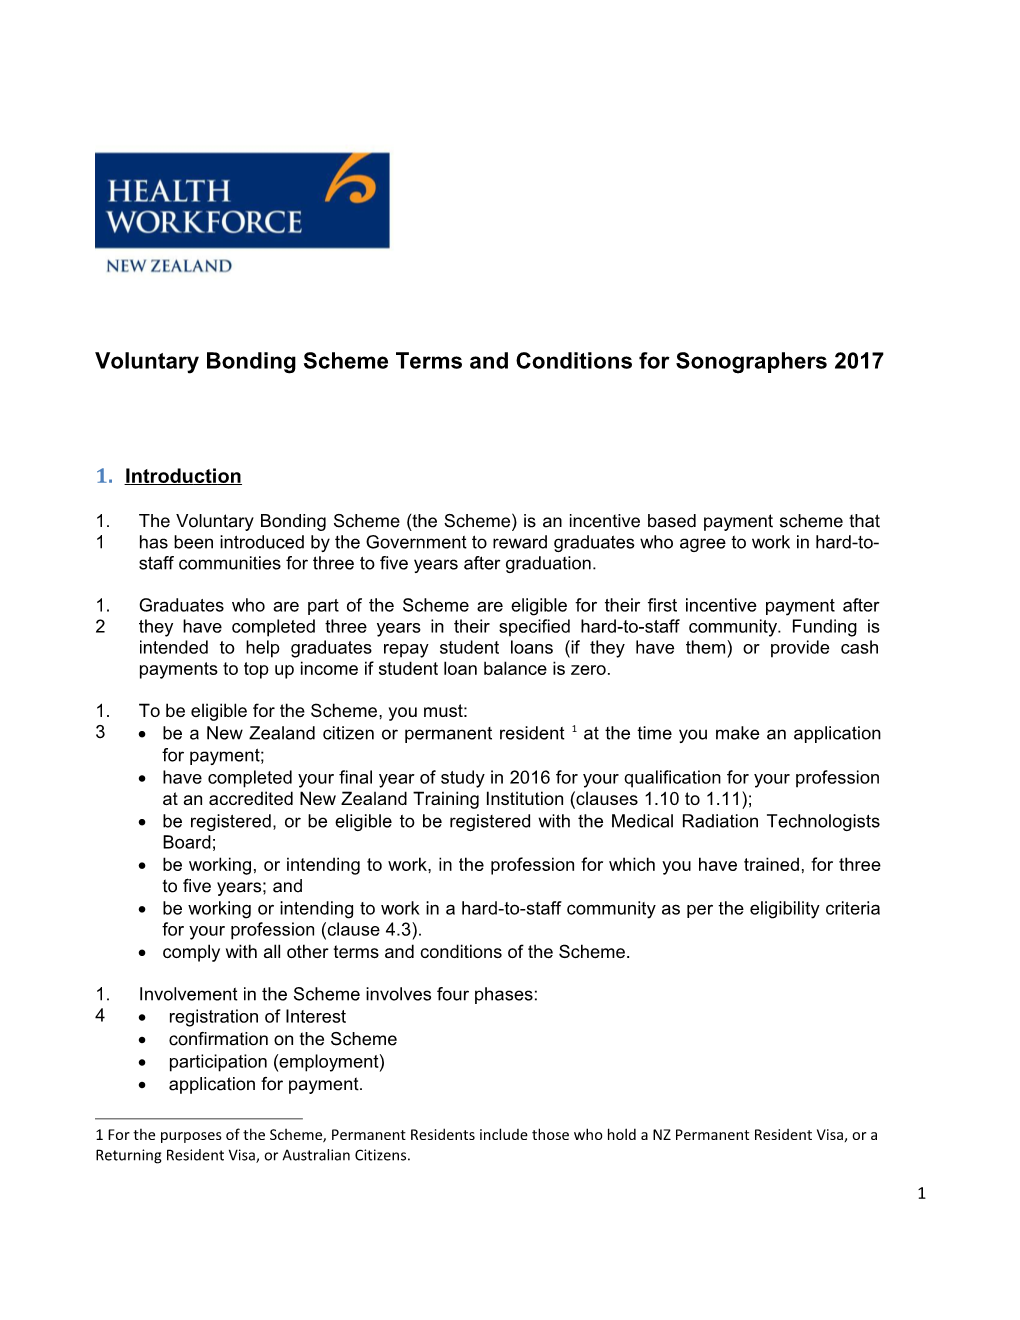 Voluntary Bonding Scheme Terms and Conditions for Sonographers 2017